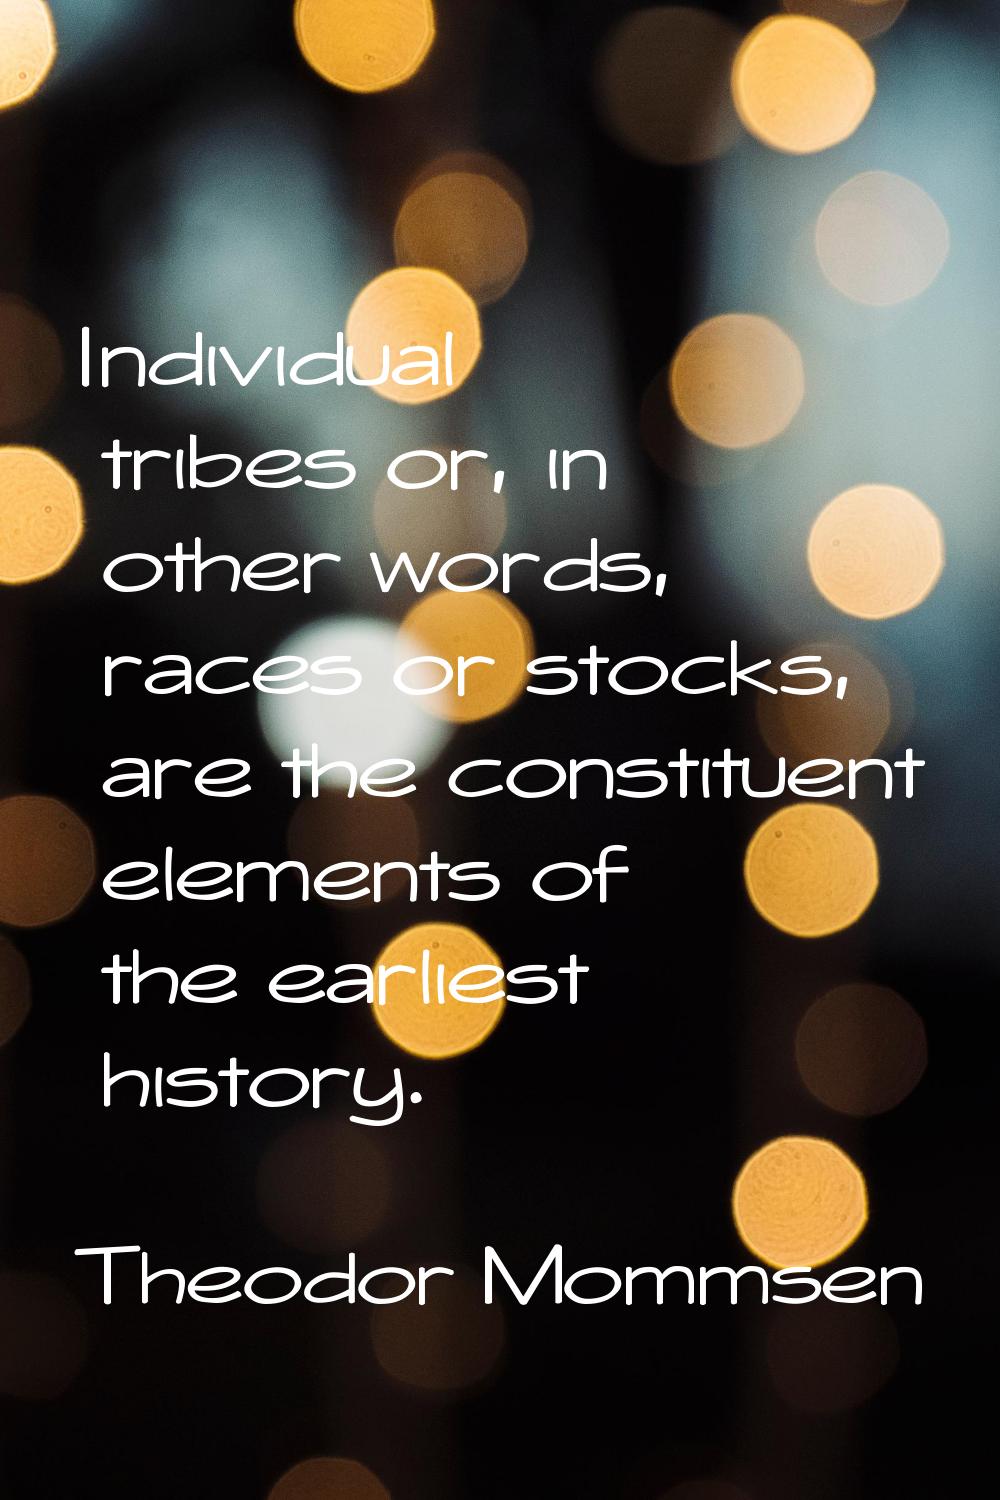 Individual tribes or, in other words, races or stocks, are the constituent elements of the earliest